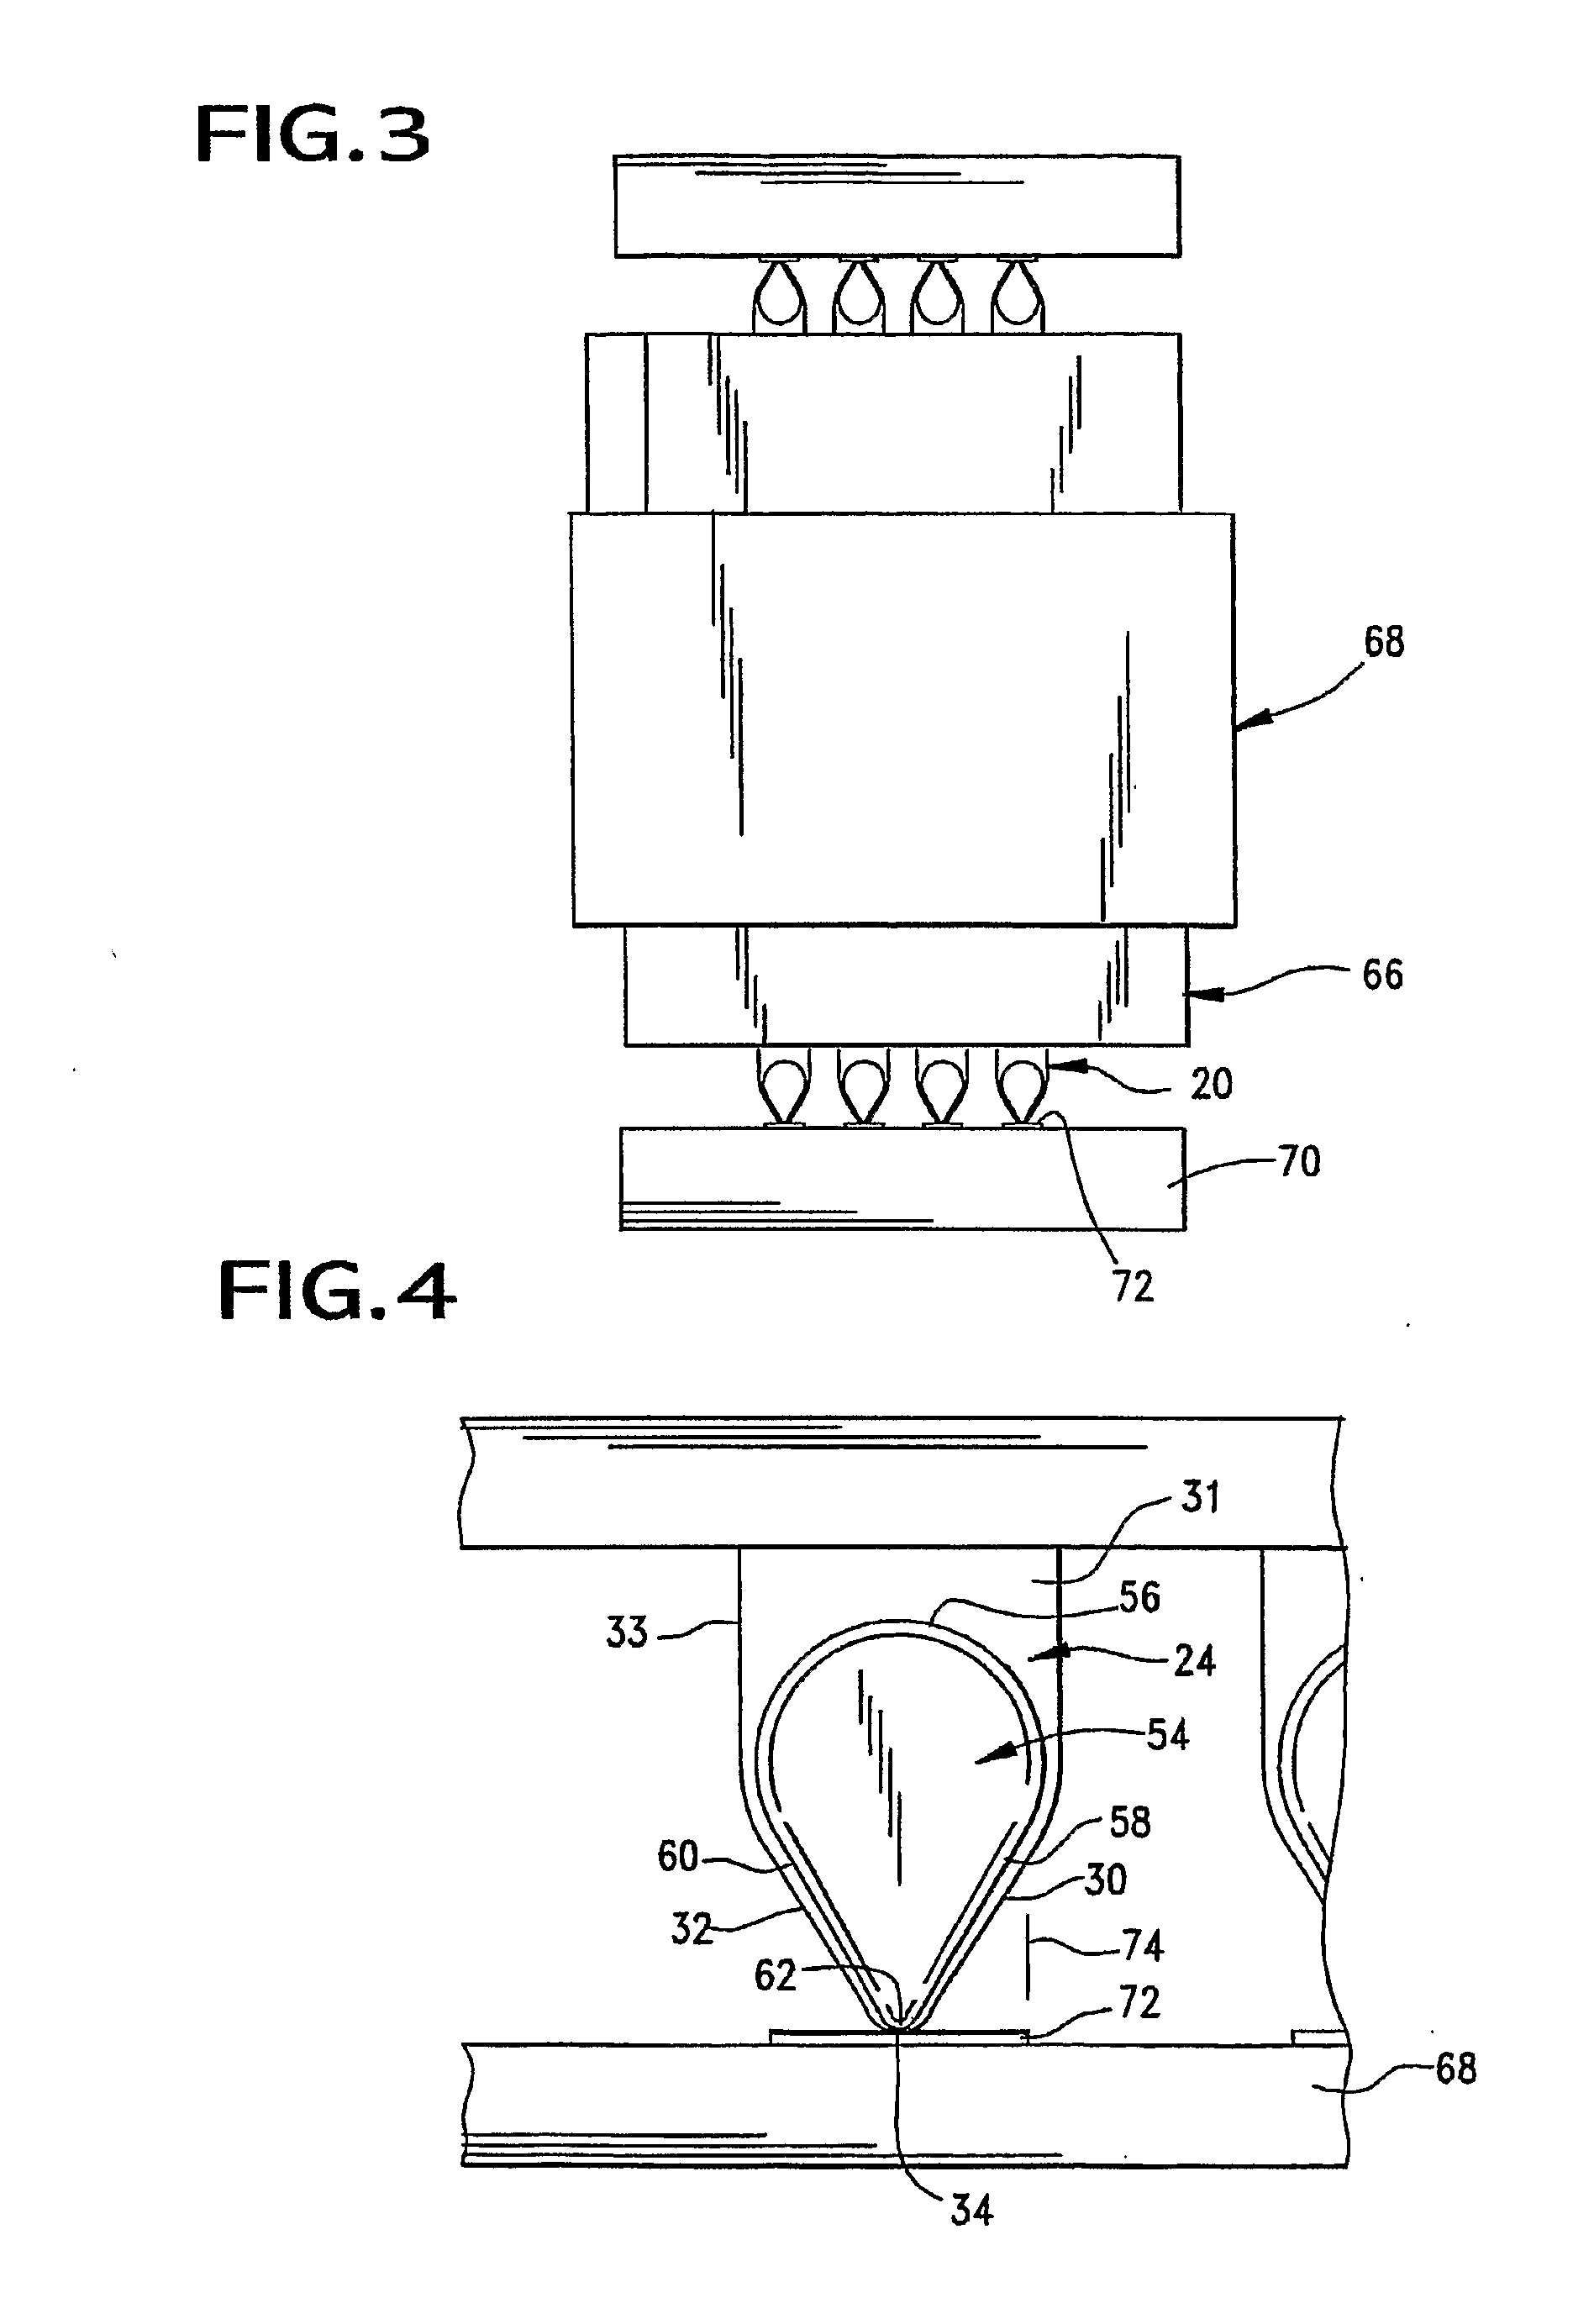 Method Of Attaching A Solder Element To Contact And The Contact Assembly Formed Thereby